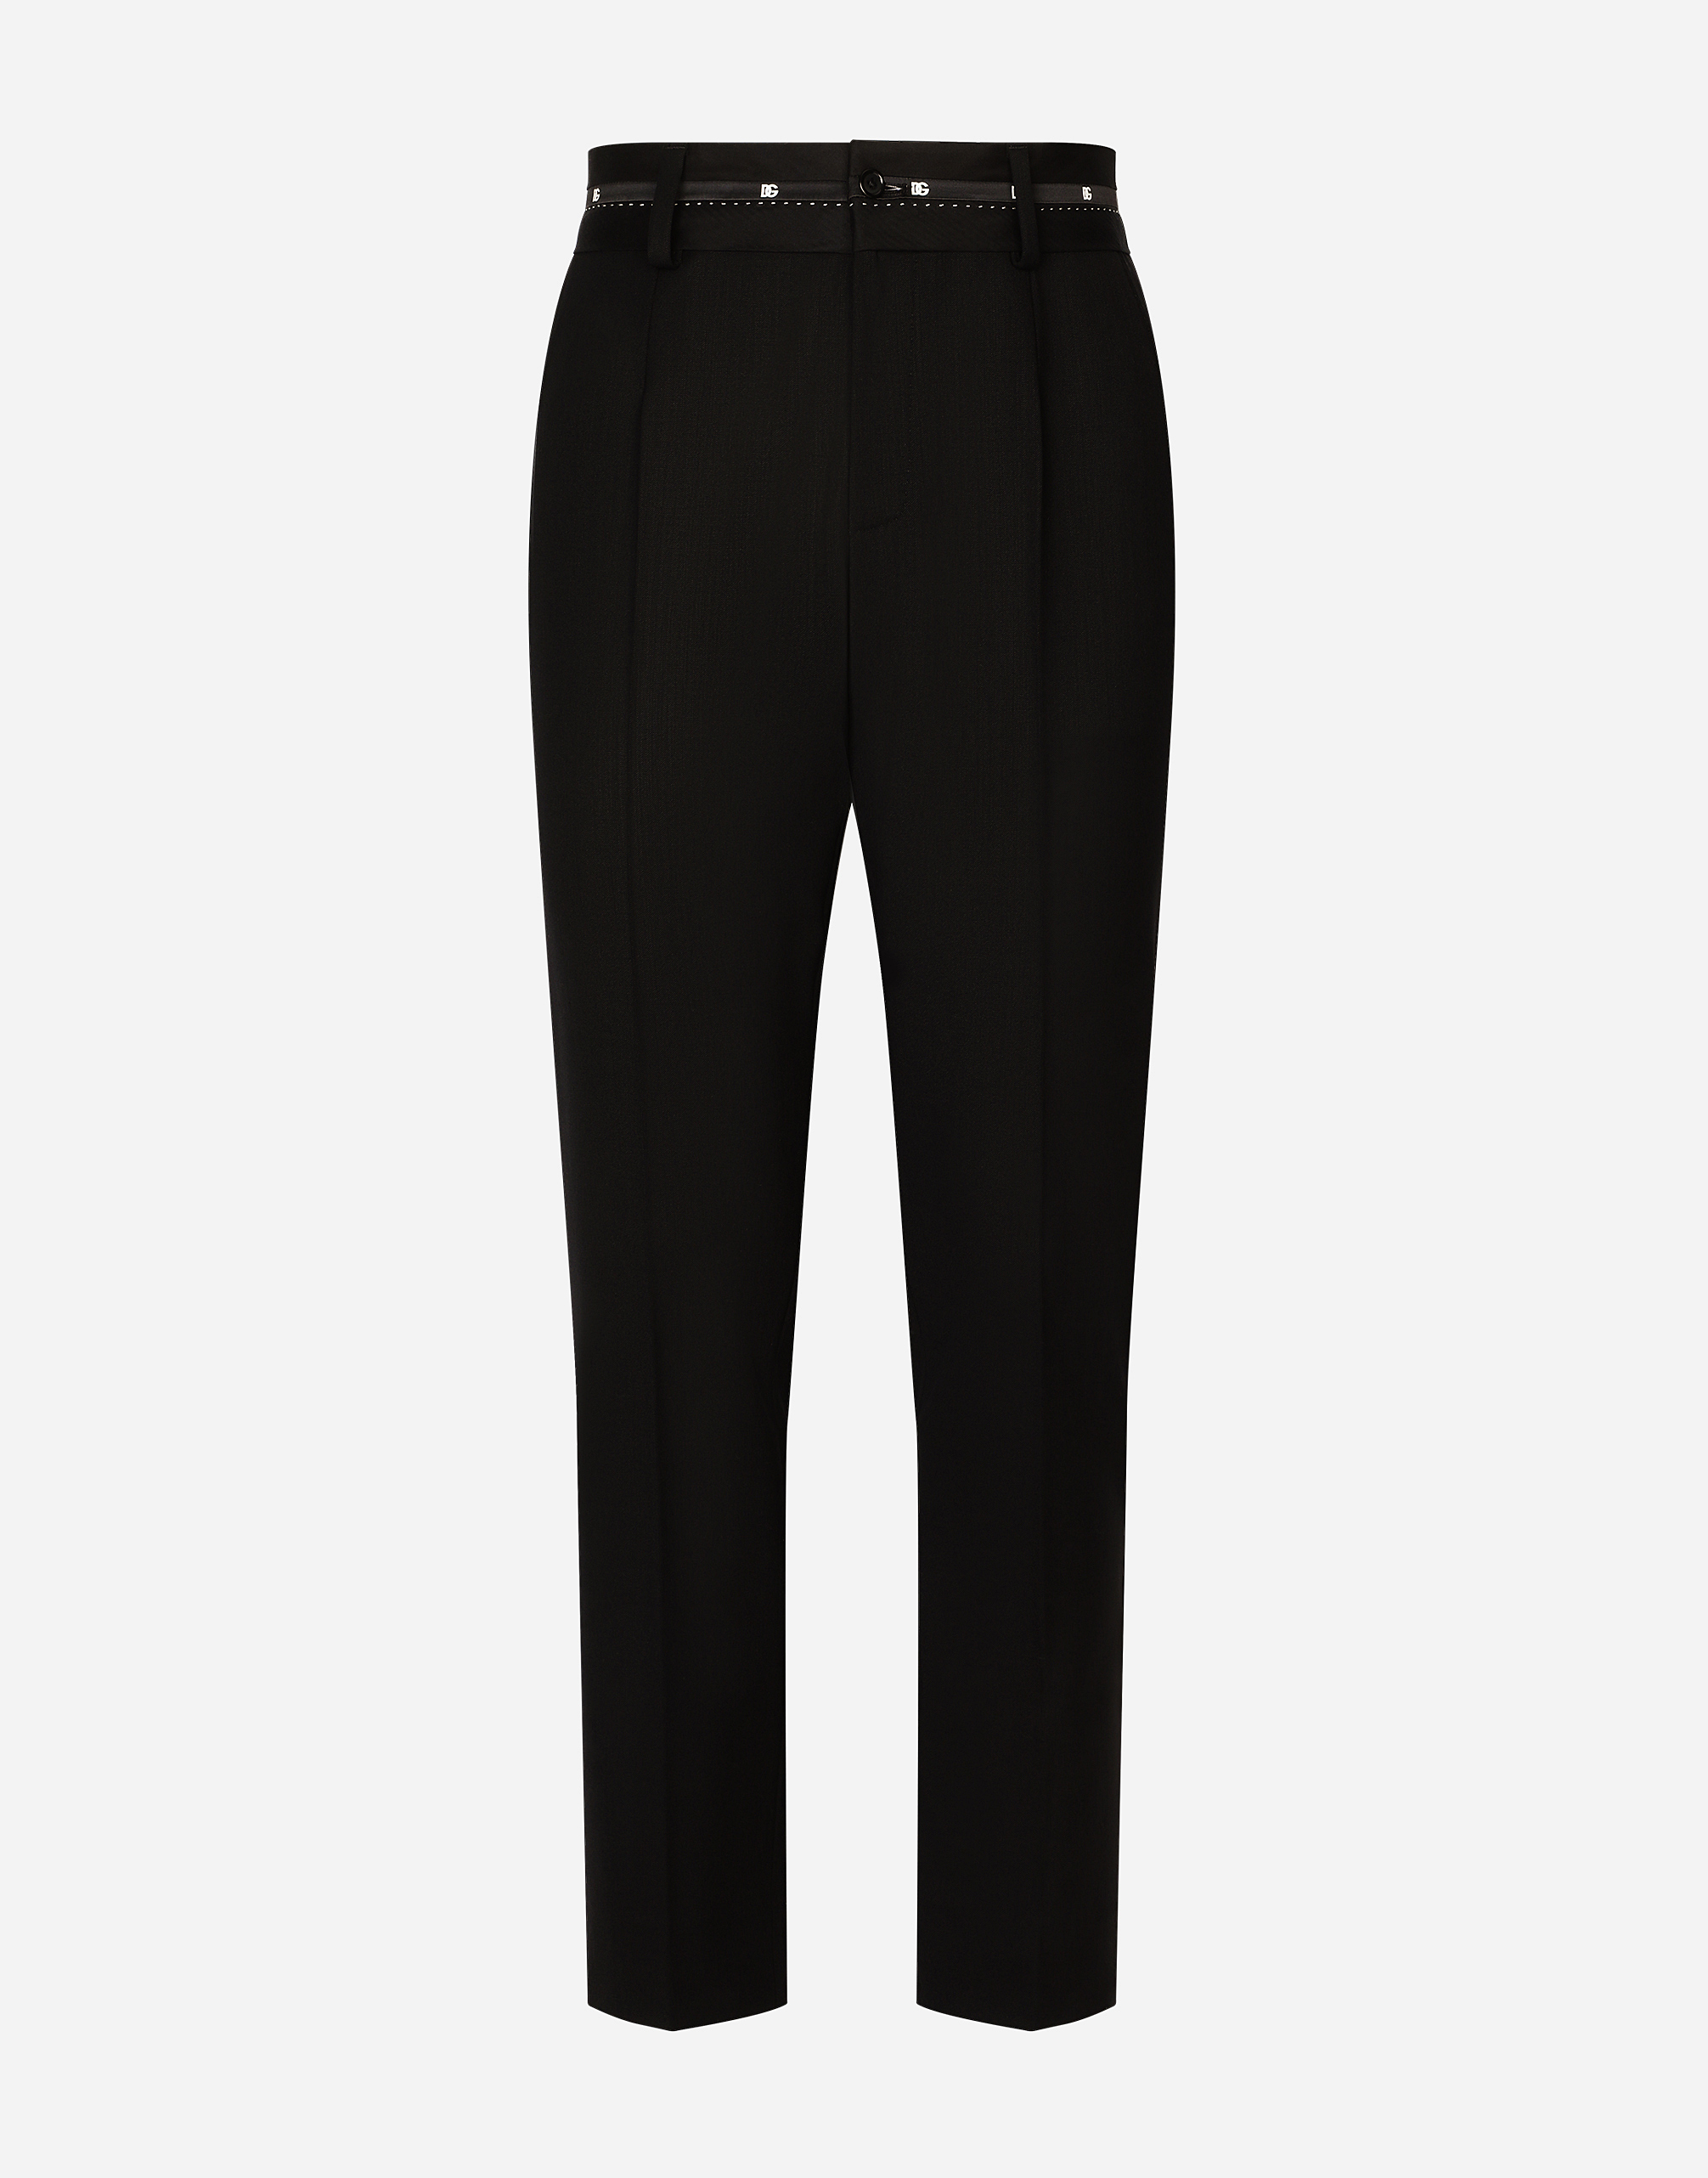 Dolce & Gabbana Stretch Wool Pants With Branded Waistband In Black